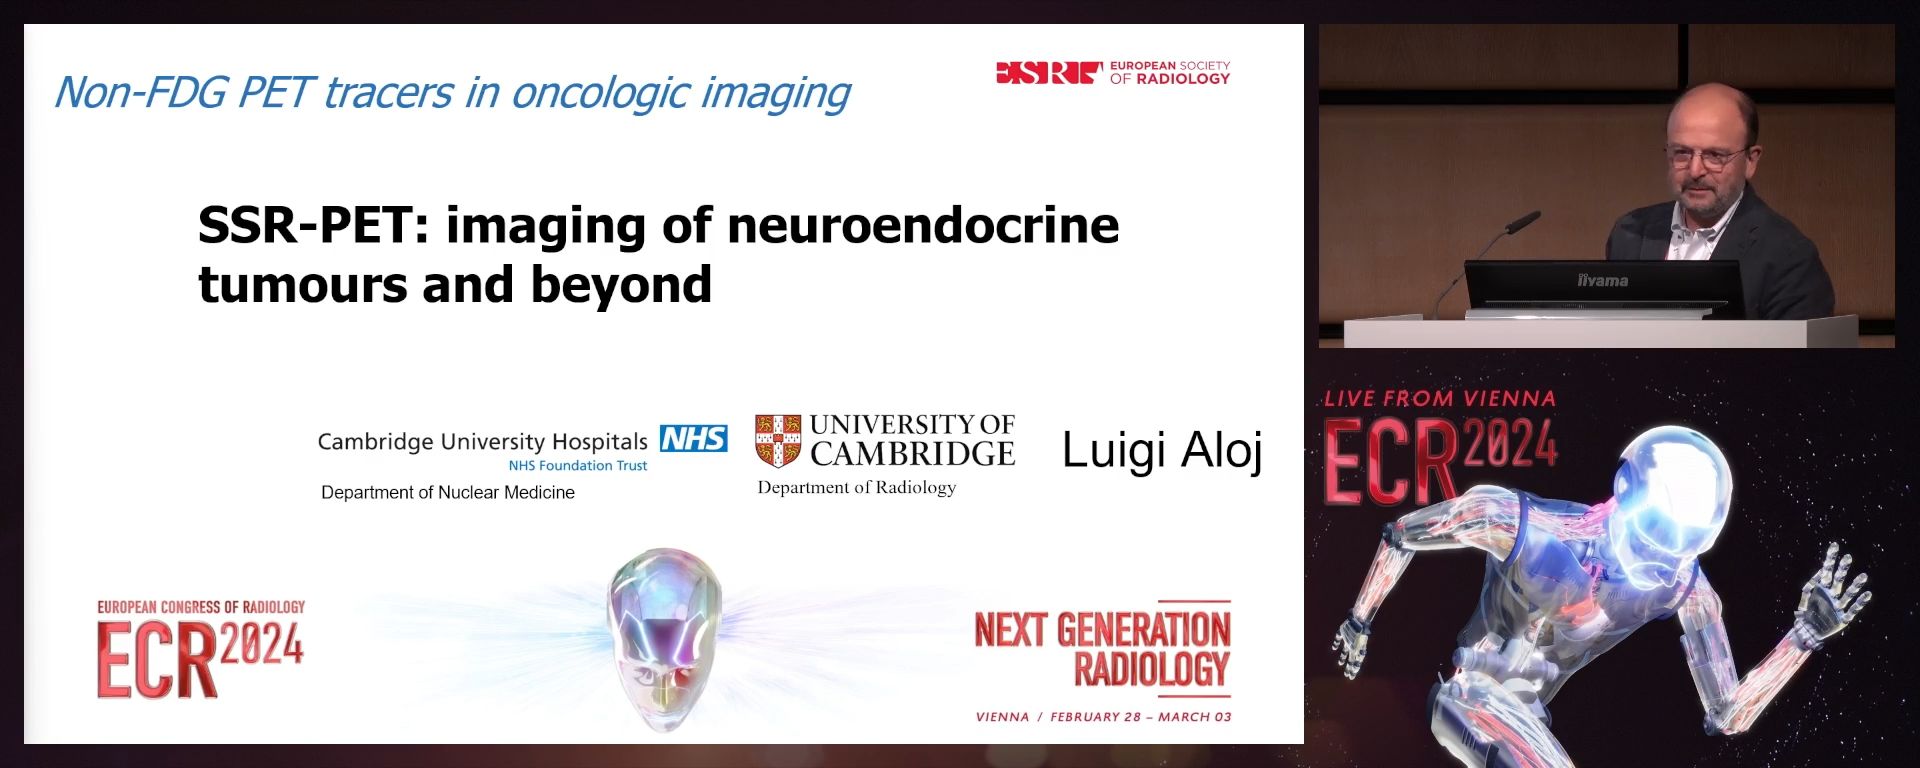 SSR-PET: imaging of neuroendocrine tumours and beyond